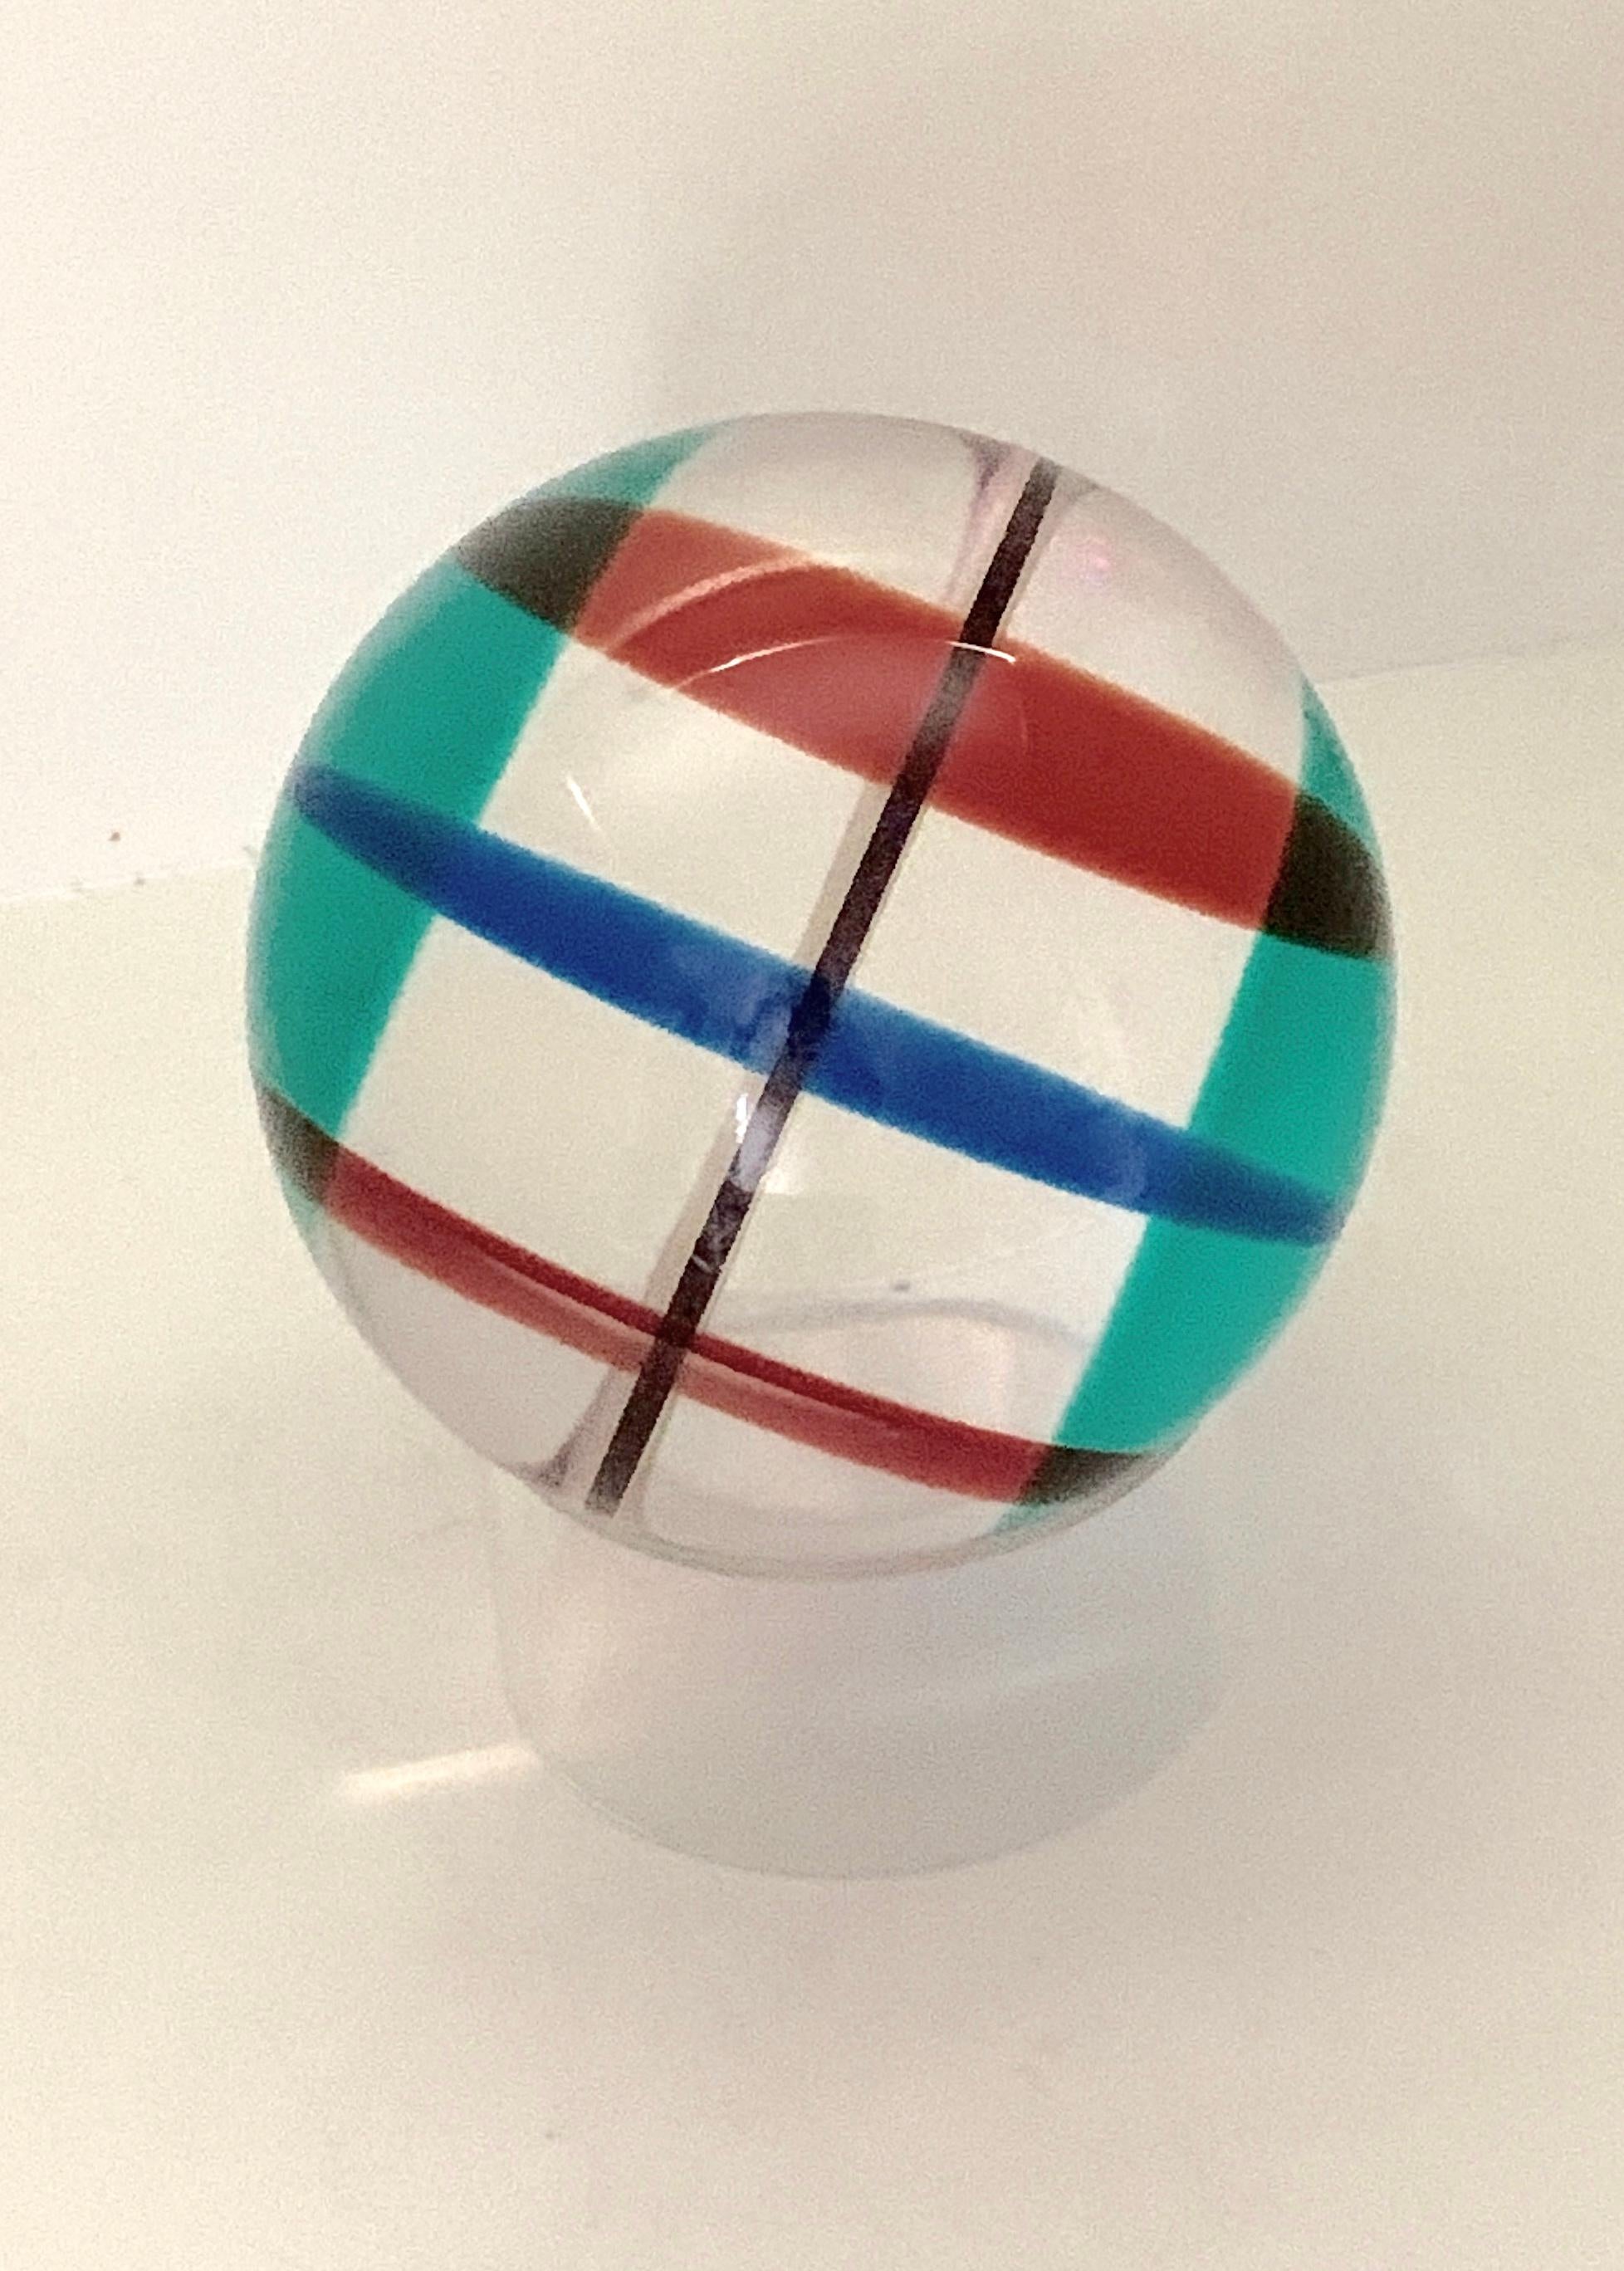 A 1997 signed Vasa Mihich multicolored sphere. It rests on a simple circle acrylic piece. This sphere is difficult to photograph and we have presented it with flash and without. It is in good age appropriate condition with some surface